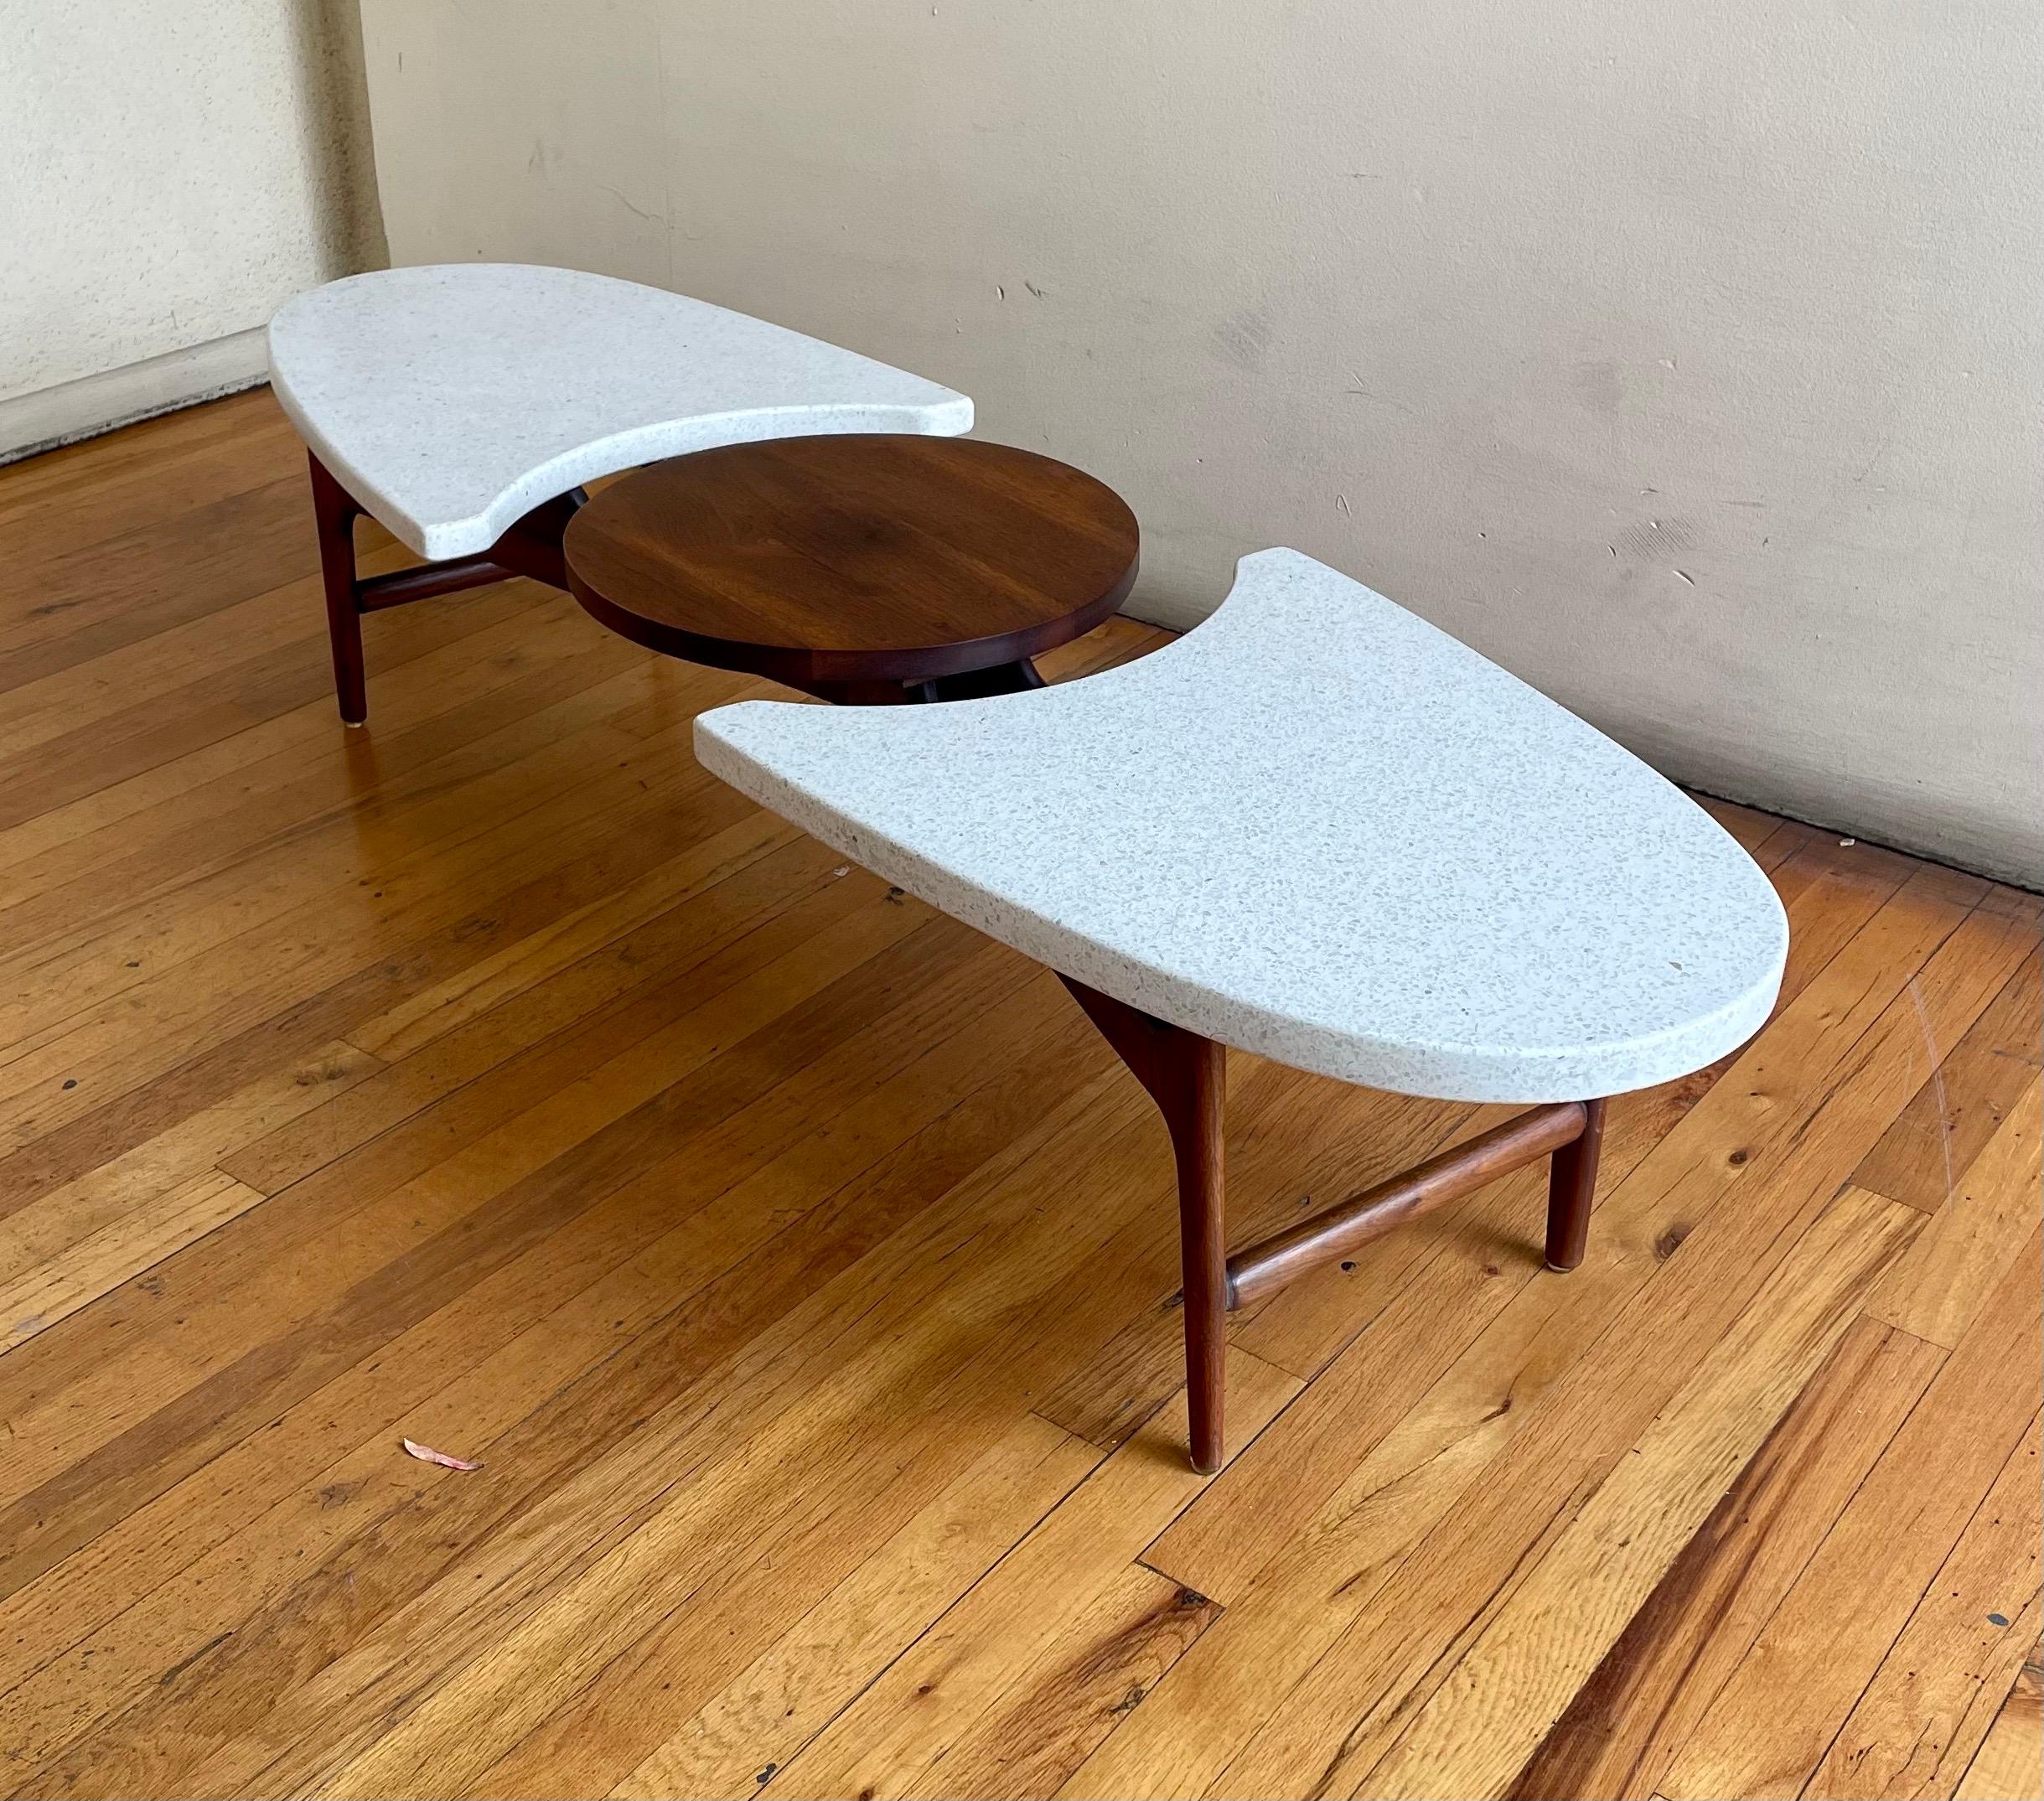 American Mid-Century Modern Atomic age striking coffee table, solid walnut frame with terrazzo tops, a beautiful piece unique solid and one of a kind table. In its original finish we have cleaned and oiled it.